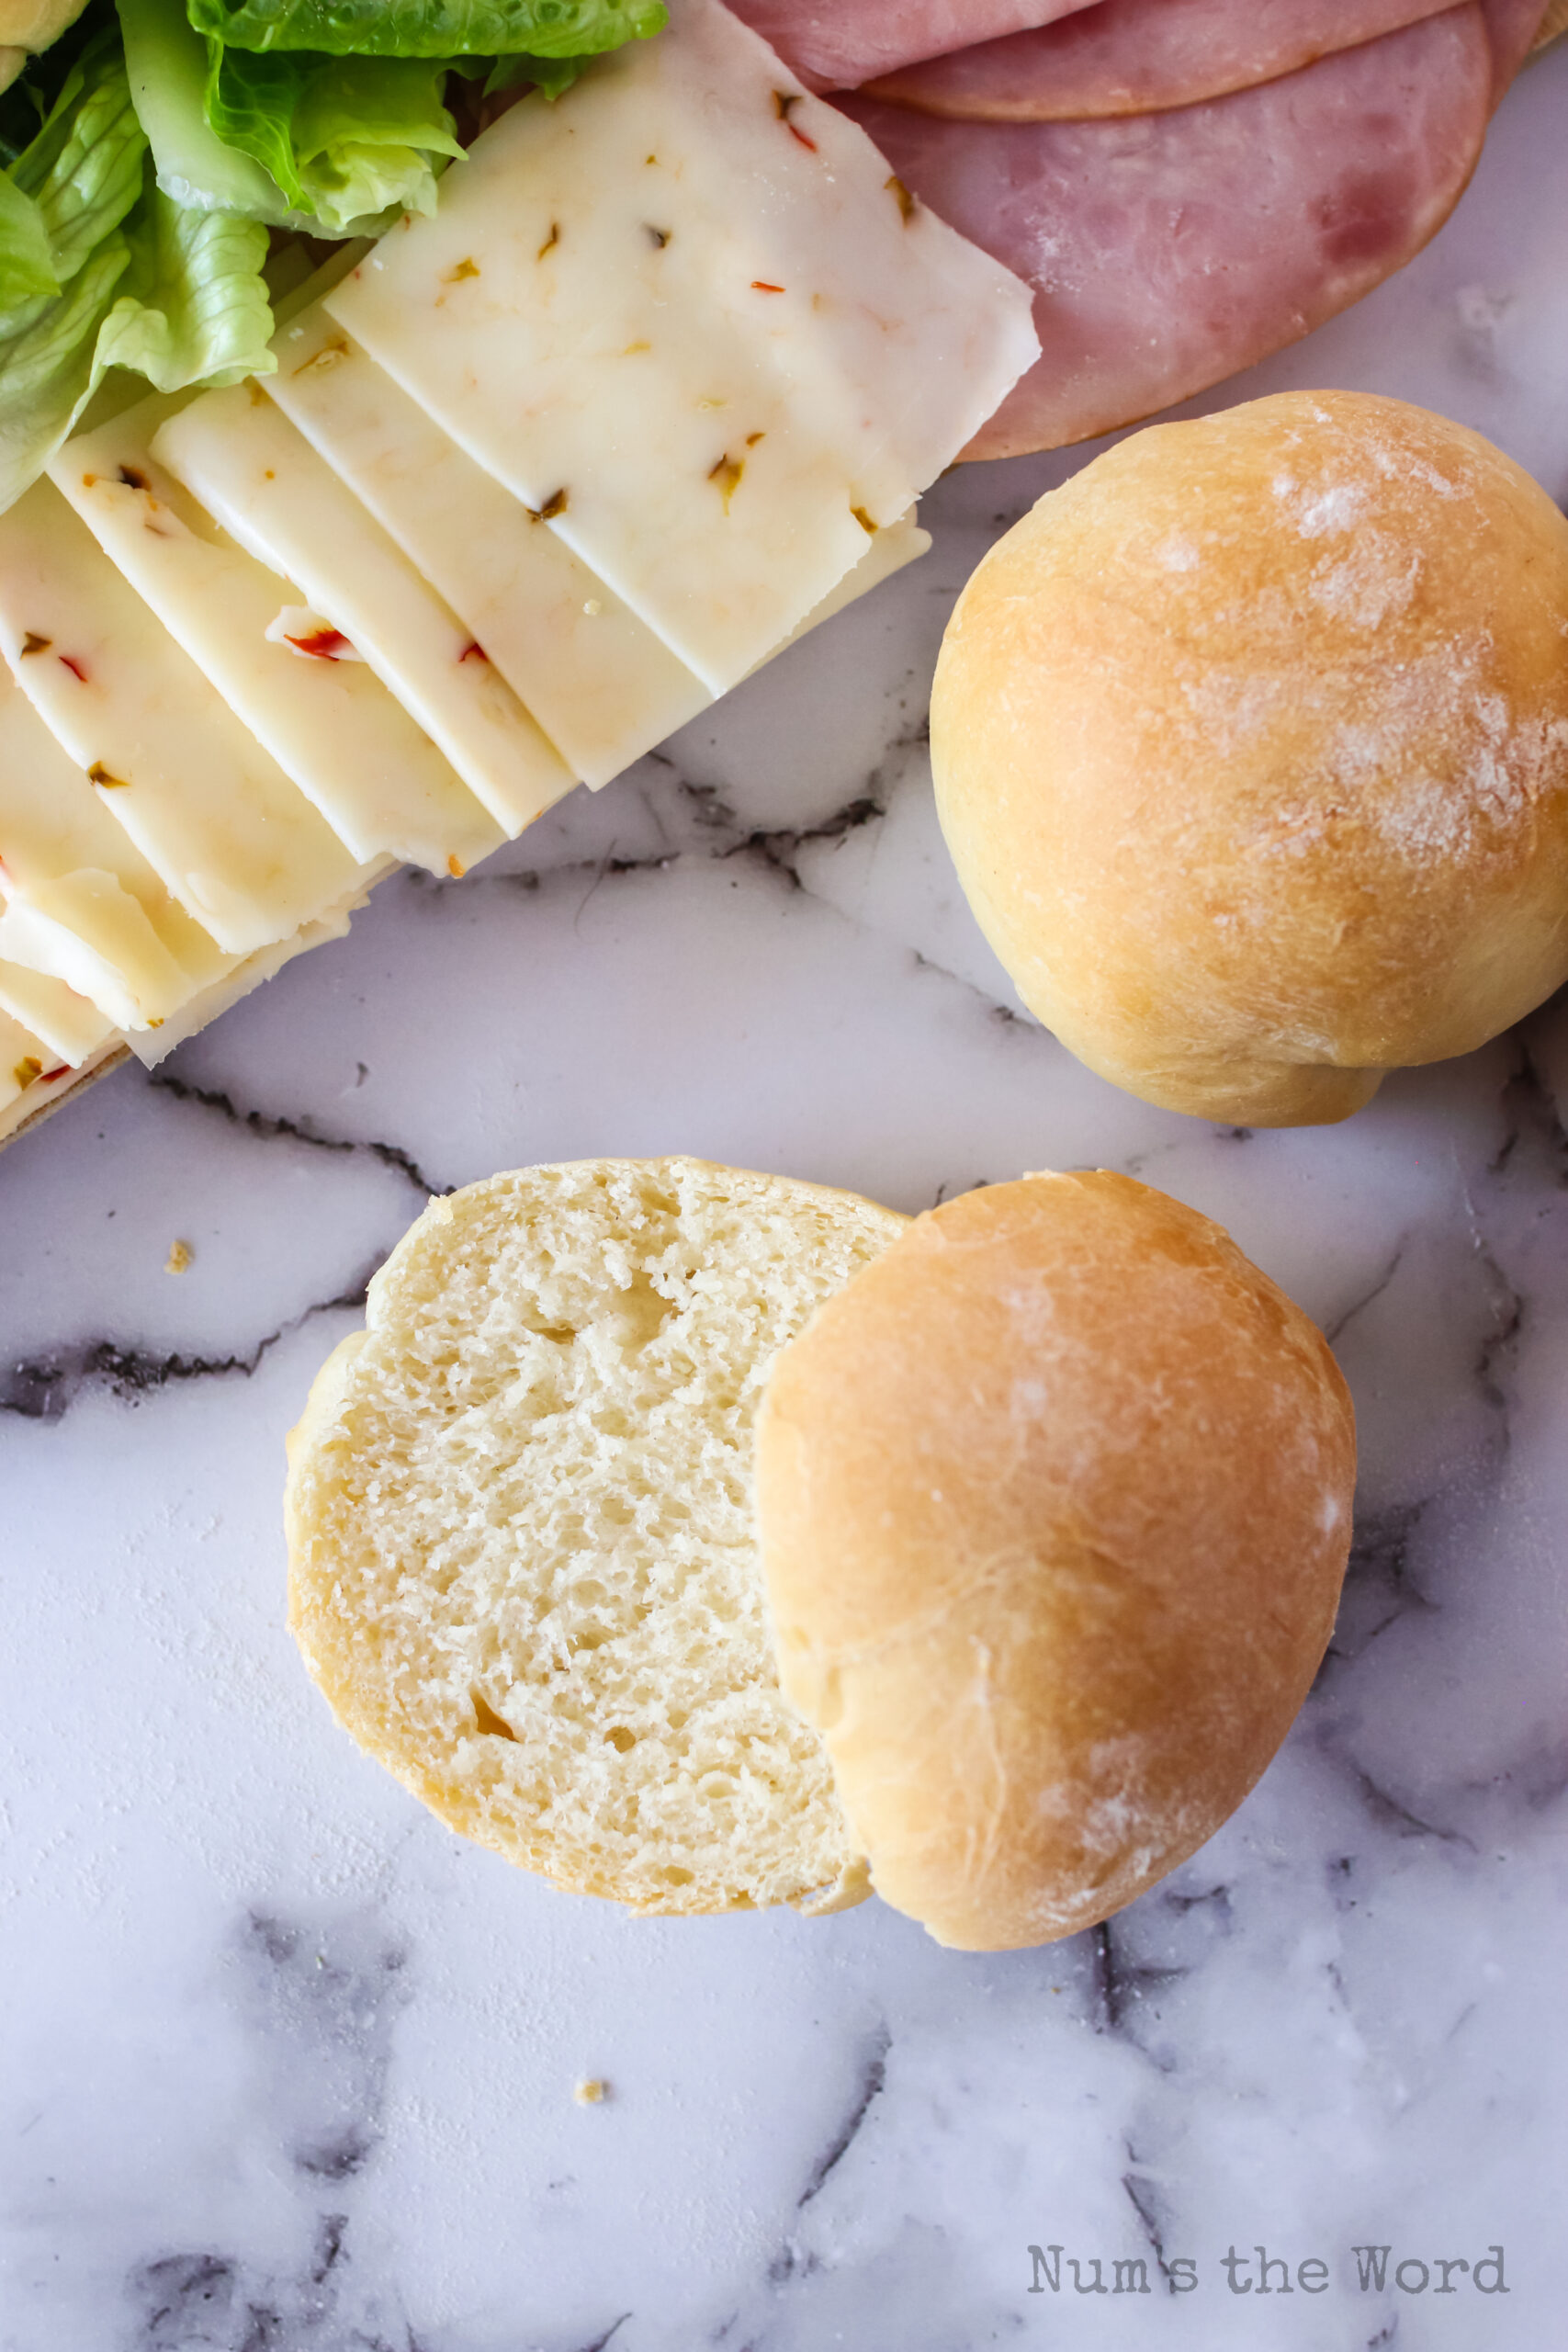 buns with cheese laid out.